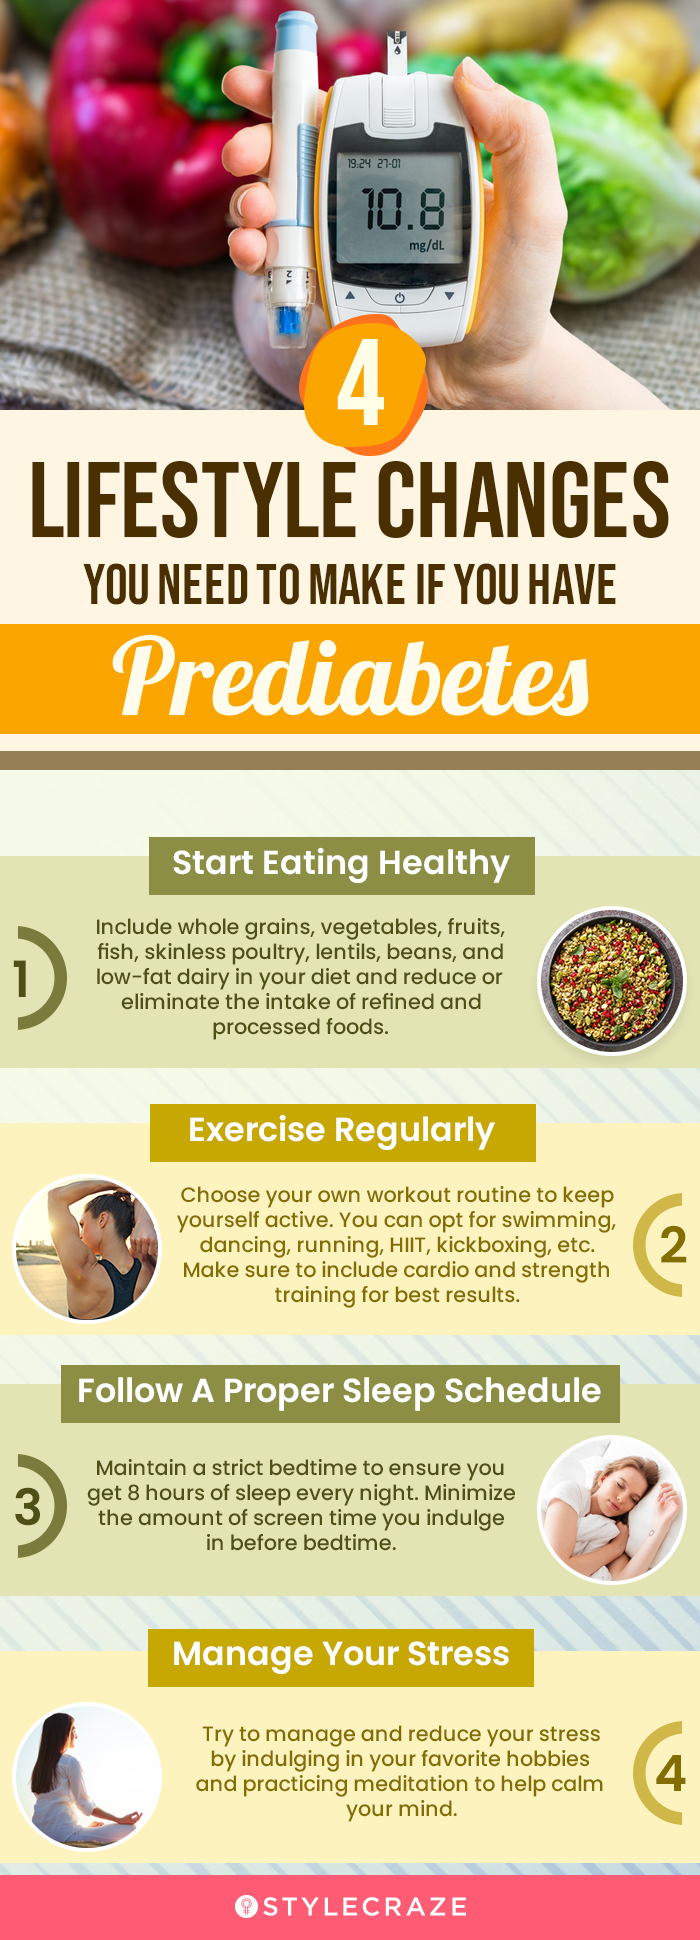 4 lifestyle changes you need to make if you have prediabetes (infographic)